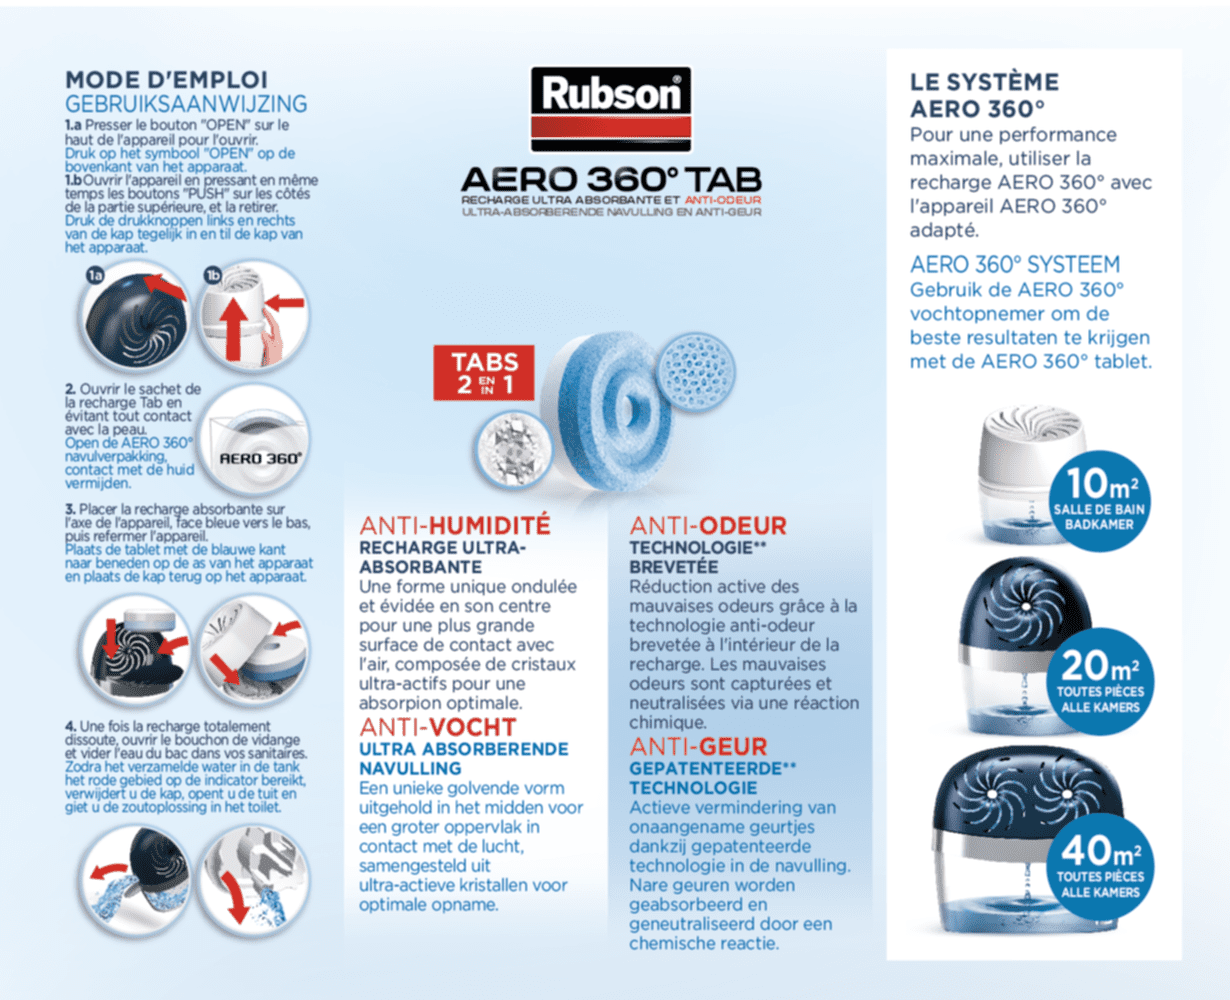 6 recharges absorbeur d'humidité Aero 360° - RUBSON - Mr.Bricolage